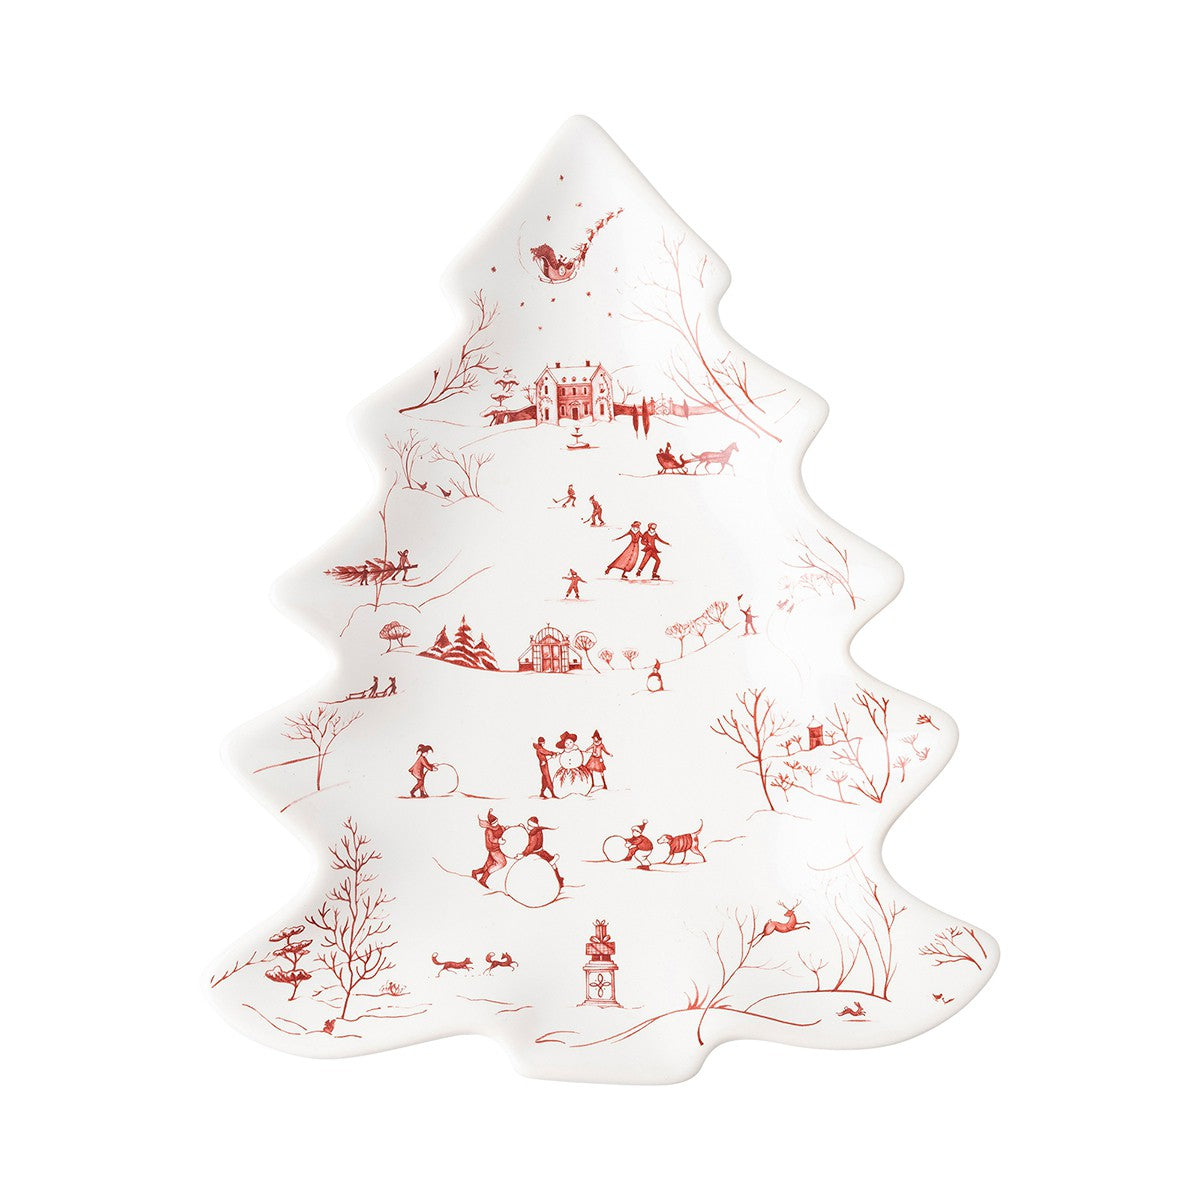 Country Estate Winter Frolic Tree Tray Small Ruby